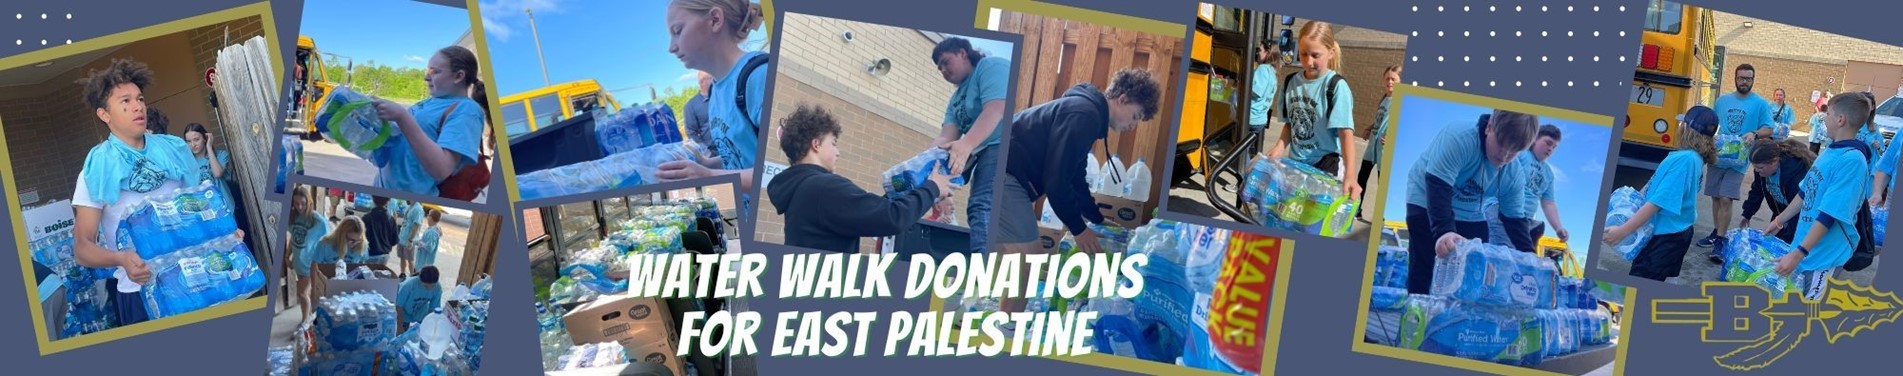 Students donate hundreds of cases of water to East Palestine residents